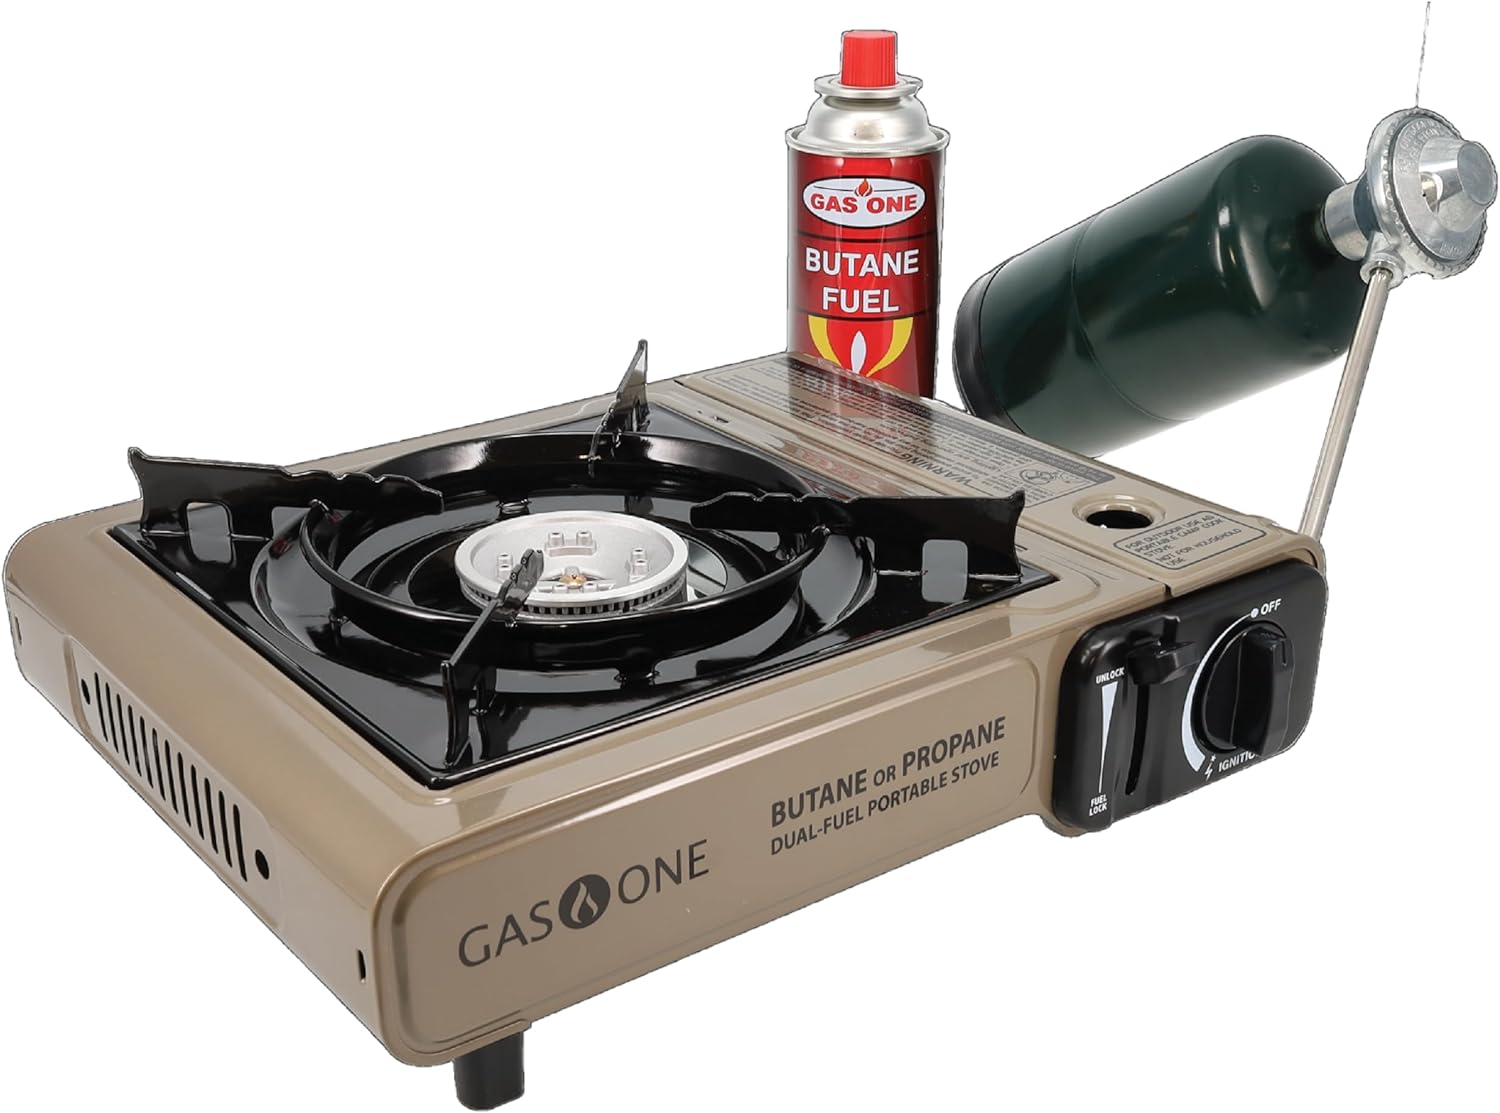 40 Van Life Essentials You Do Not Want to Be Without - Portable Camping Stove